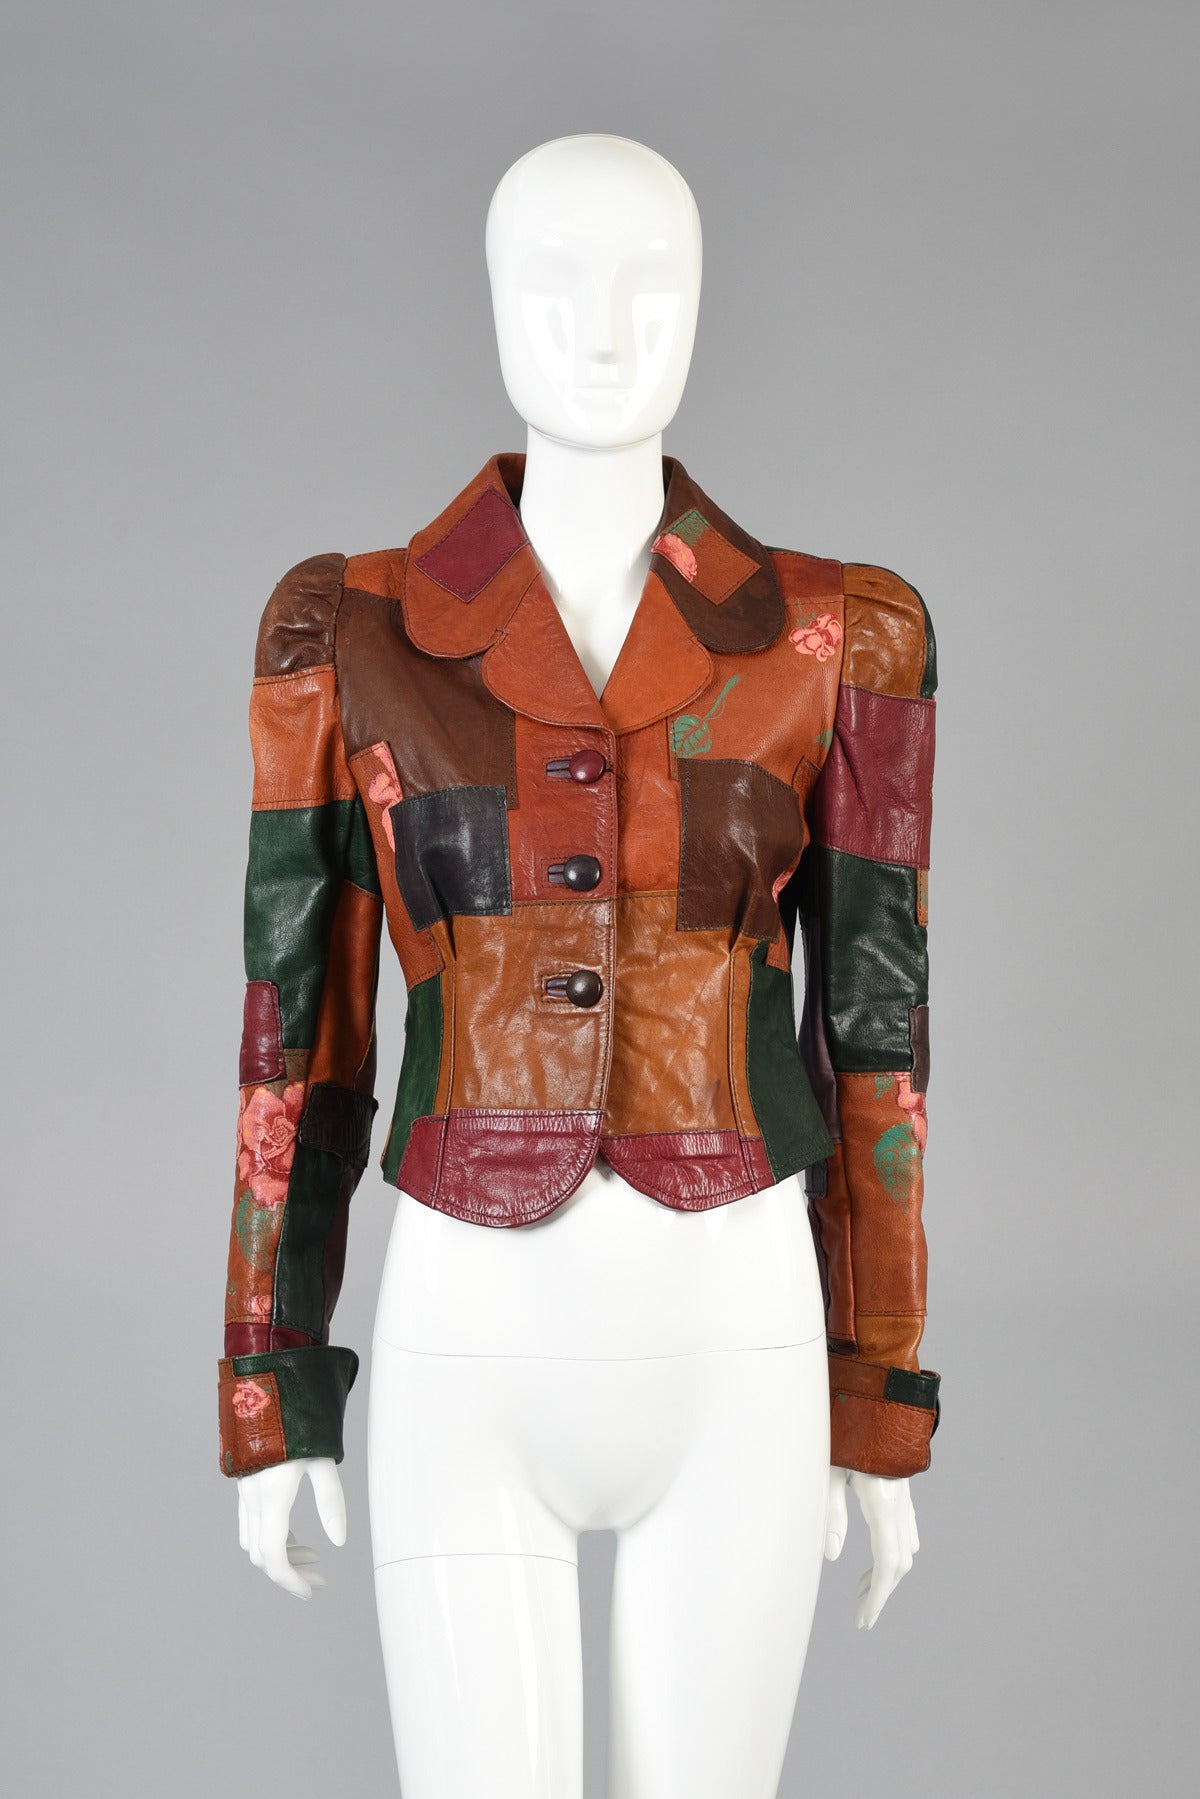 Killer 1970's patchwork leather and roses jacket by Gandalf the Wizard. Super rare and sought after design! Ultra fitted body with super long and slender puffed sleeves. Button front. A plethora of autumnal colors in the patchwork with the Gandalf